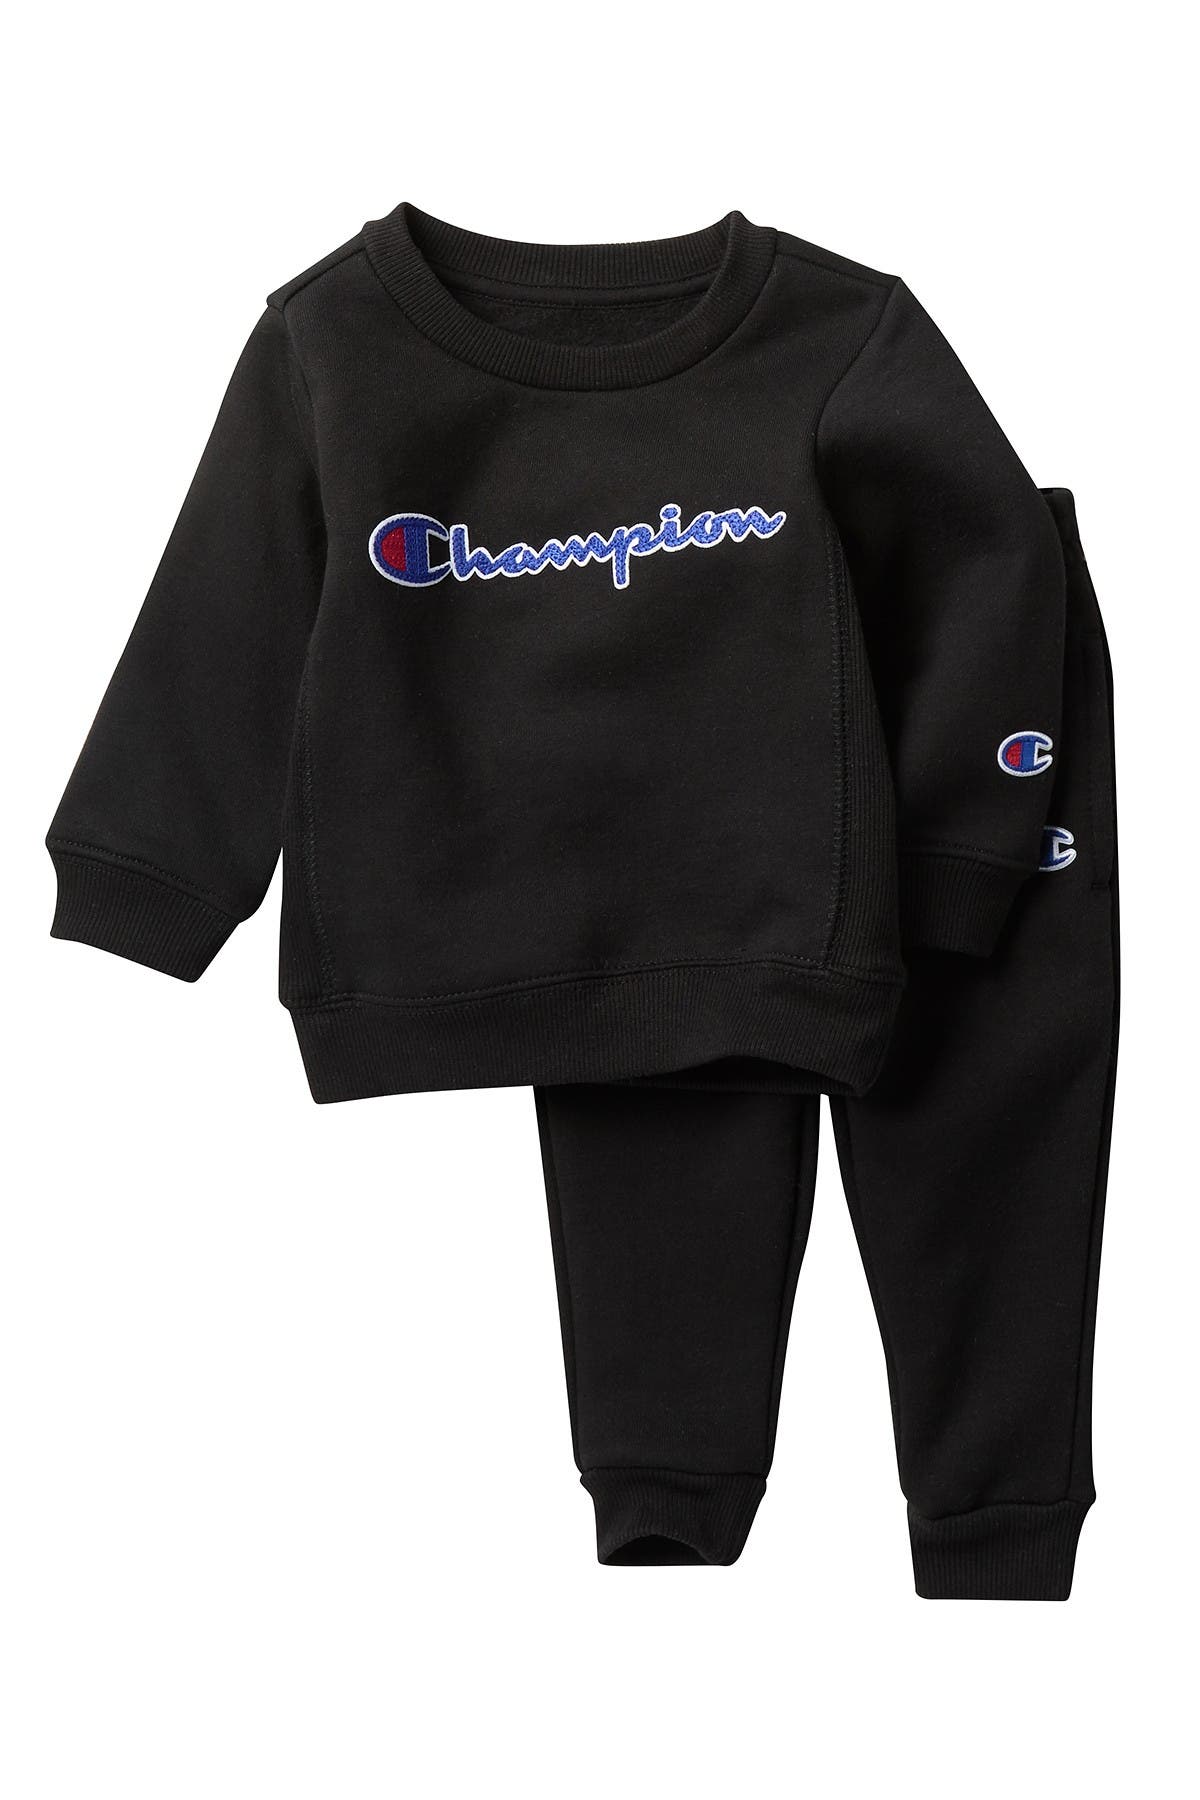 champion hoodie for babies